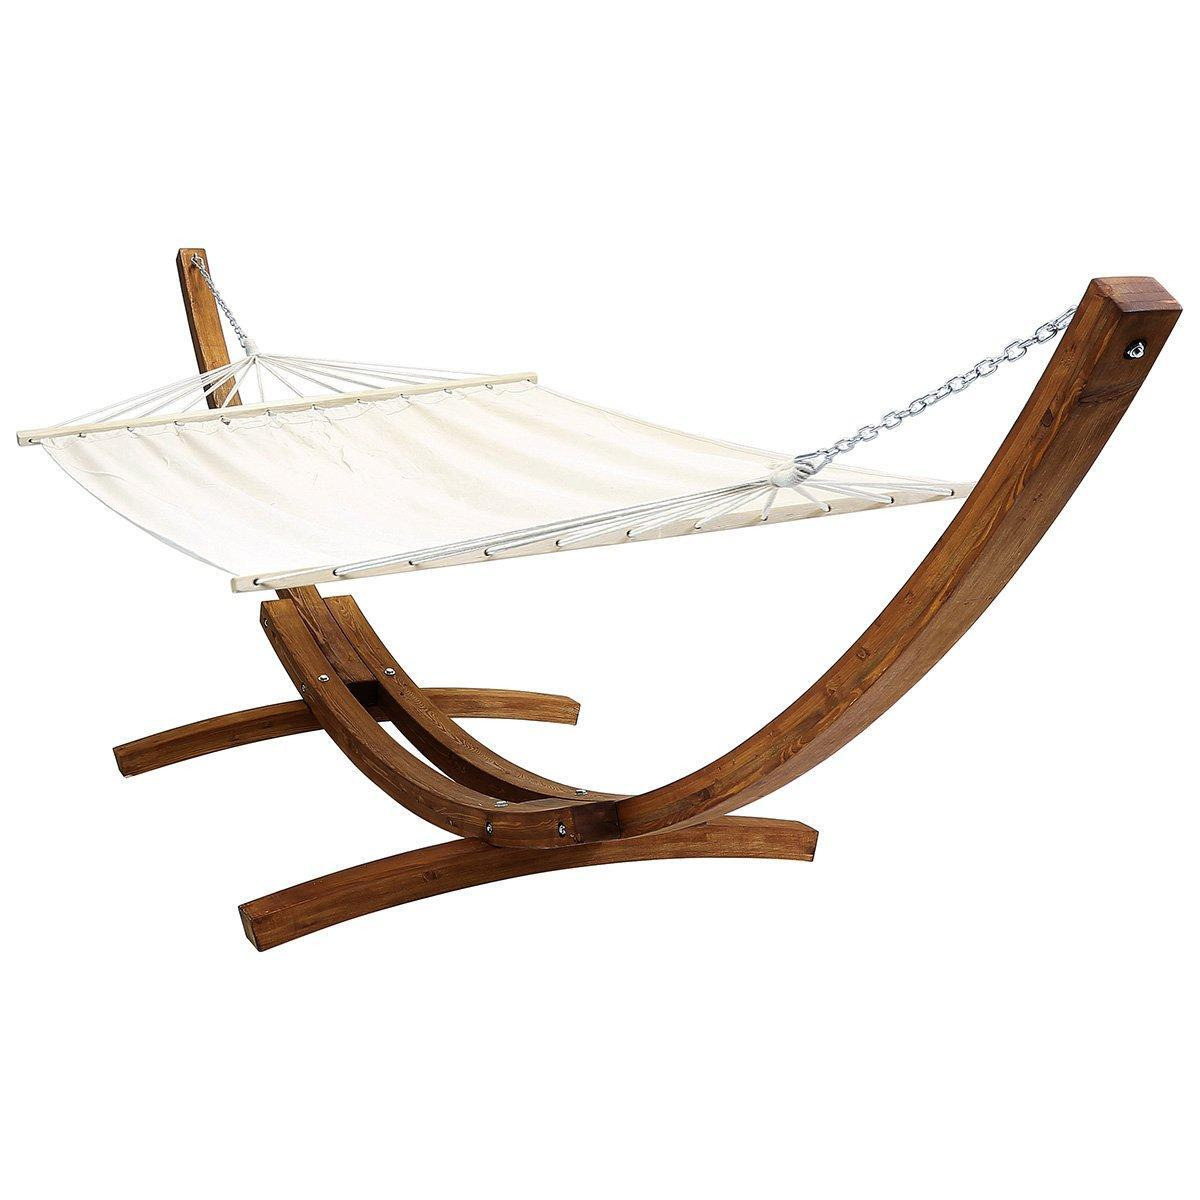 3M Garden Hammock With Wooden Arc Stand One Person - Cream - image 1